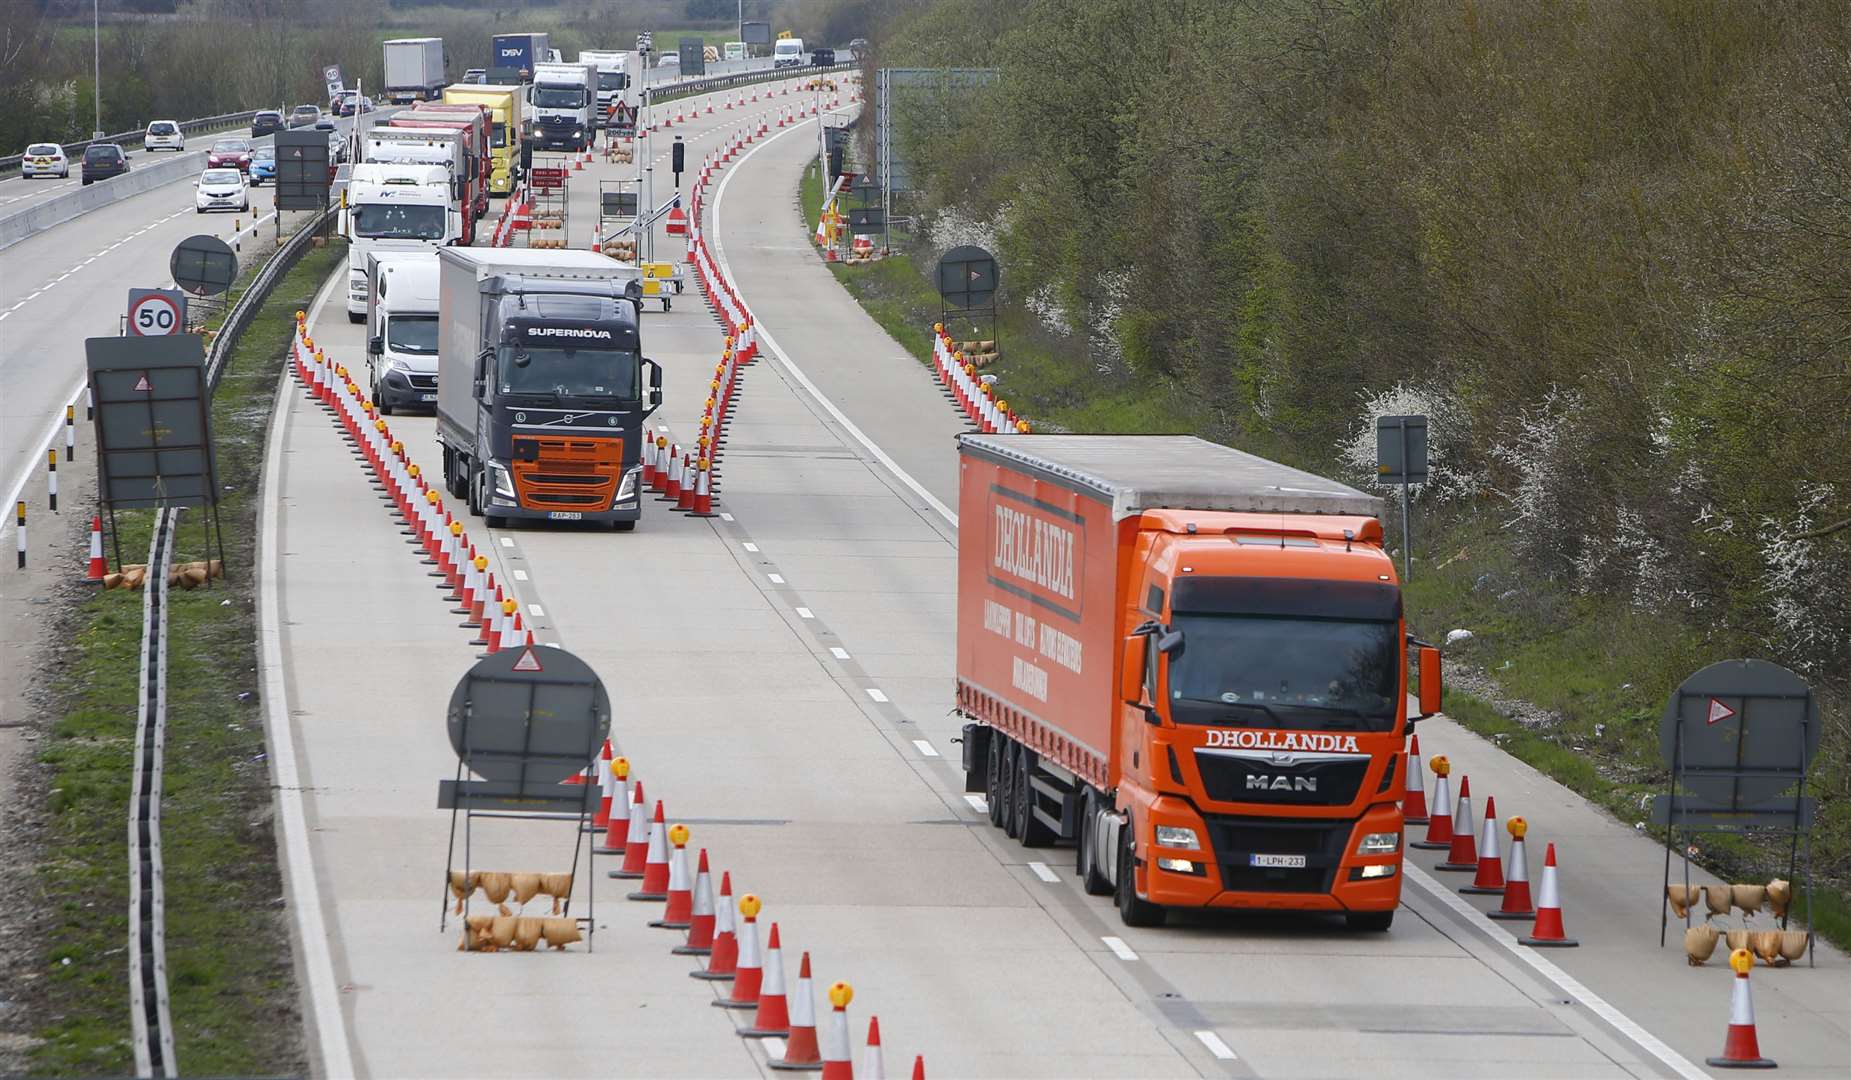 Operation Brock in place on M20 between junctions 8 and 9